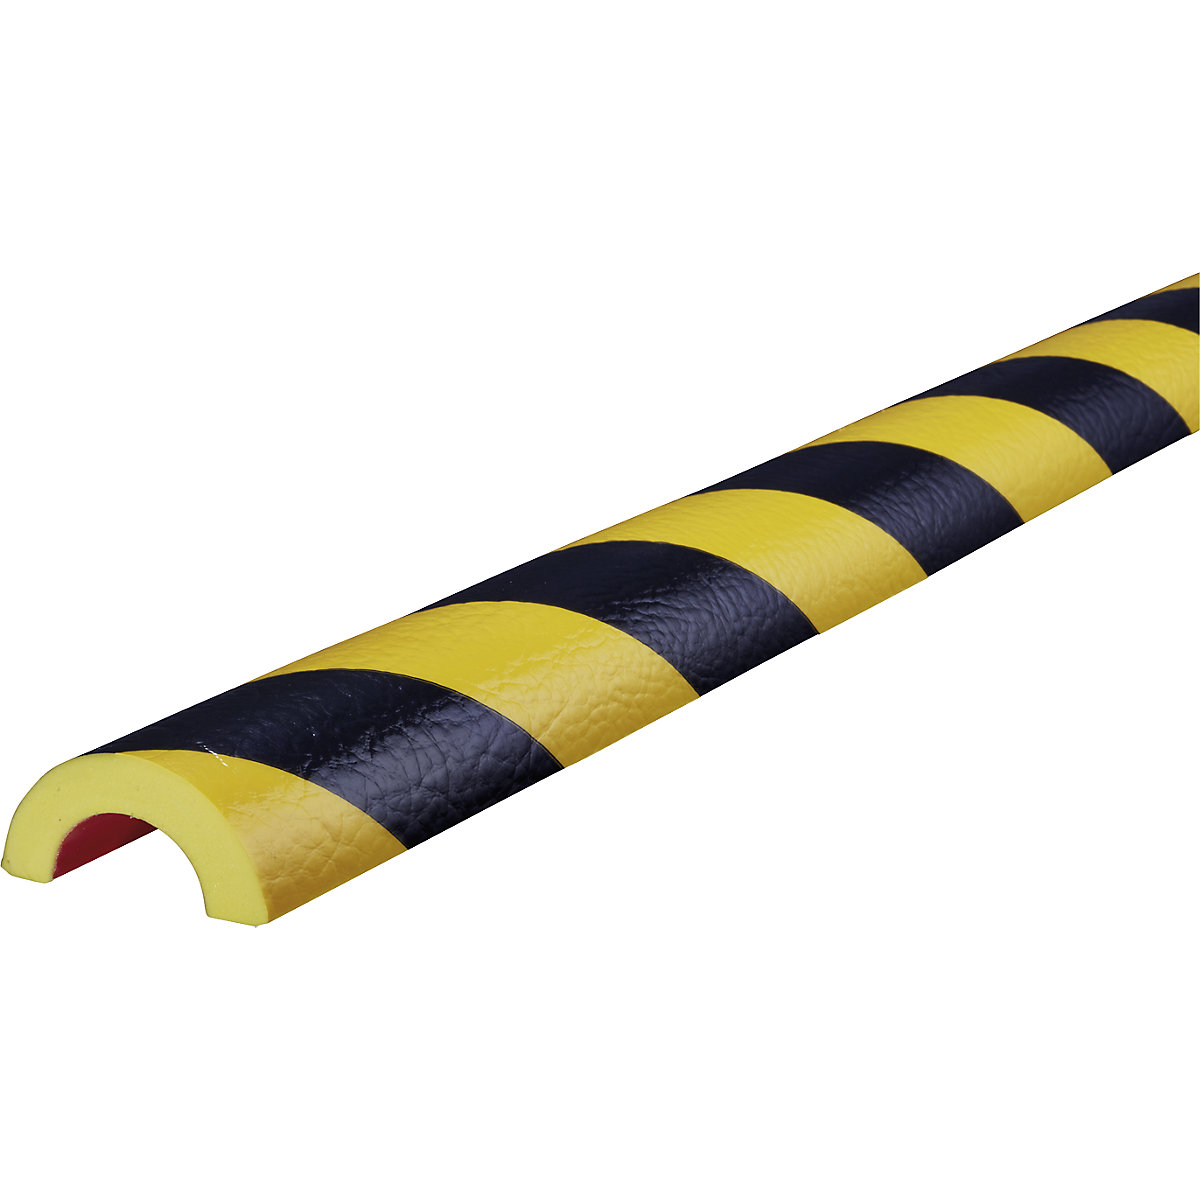 Knuffi® pipe protection – SHG, type R30, 1 m length, black / yellow-12